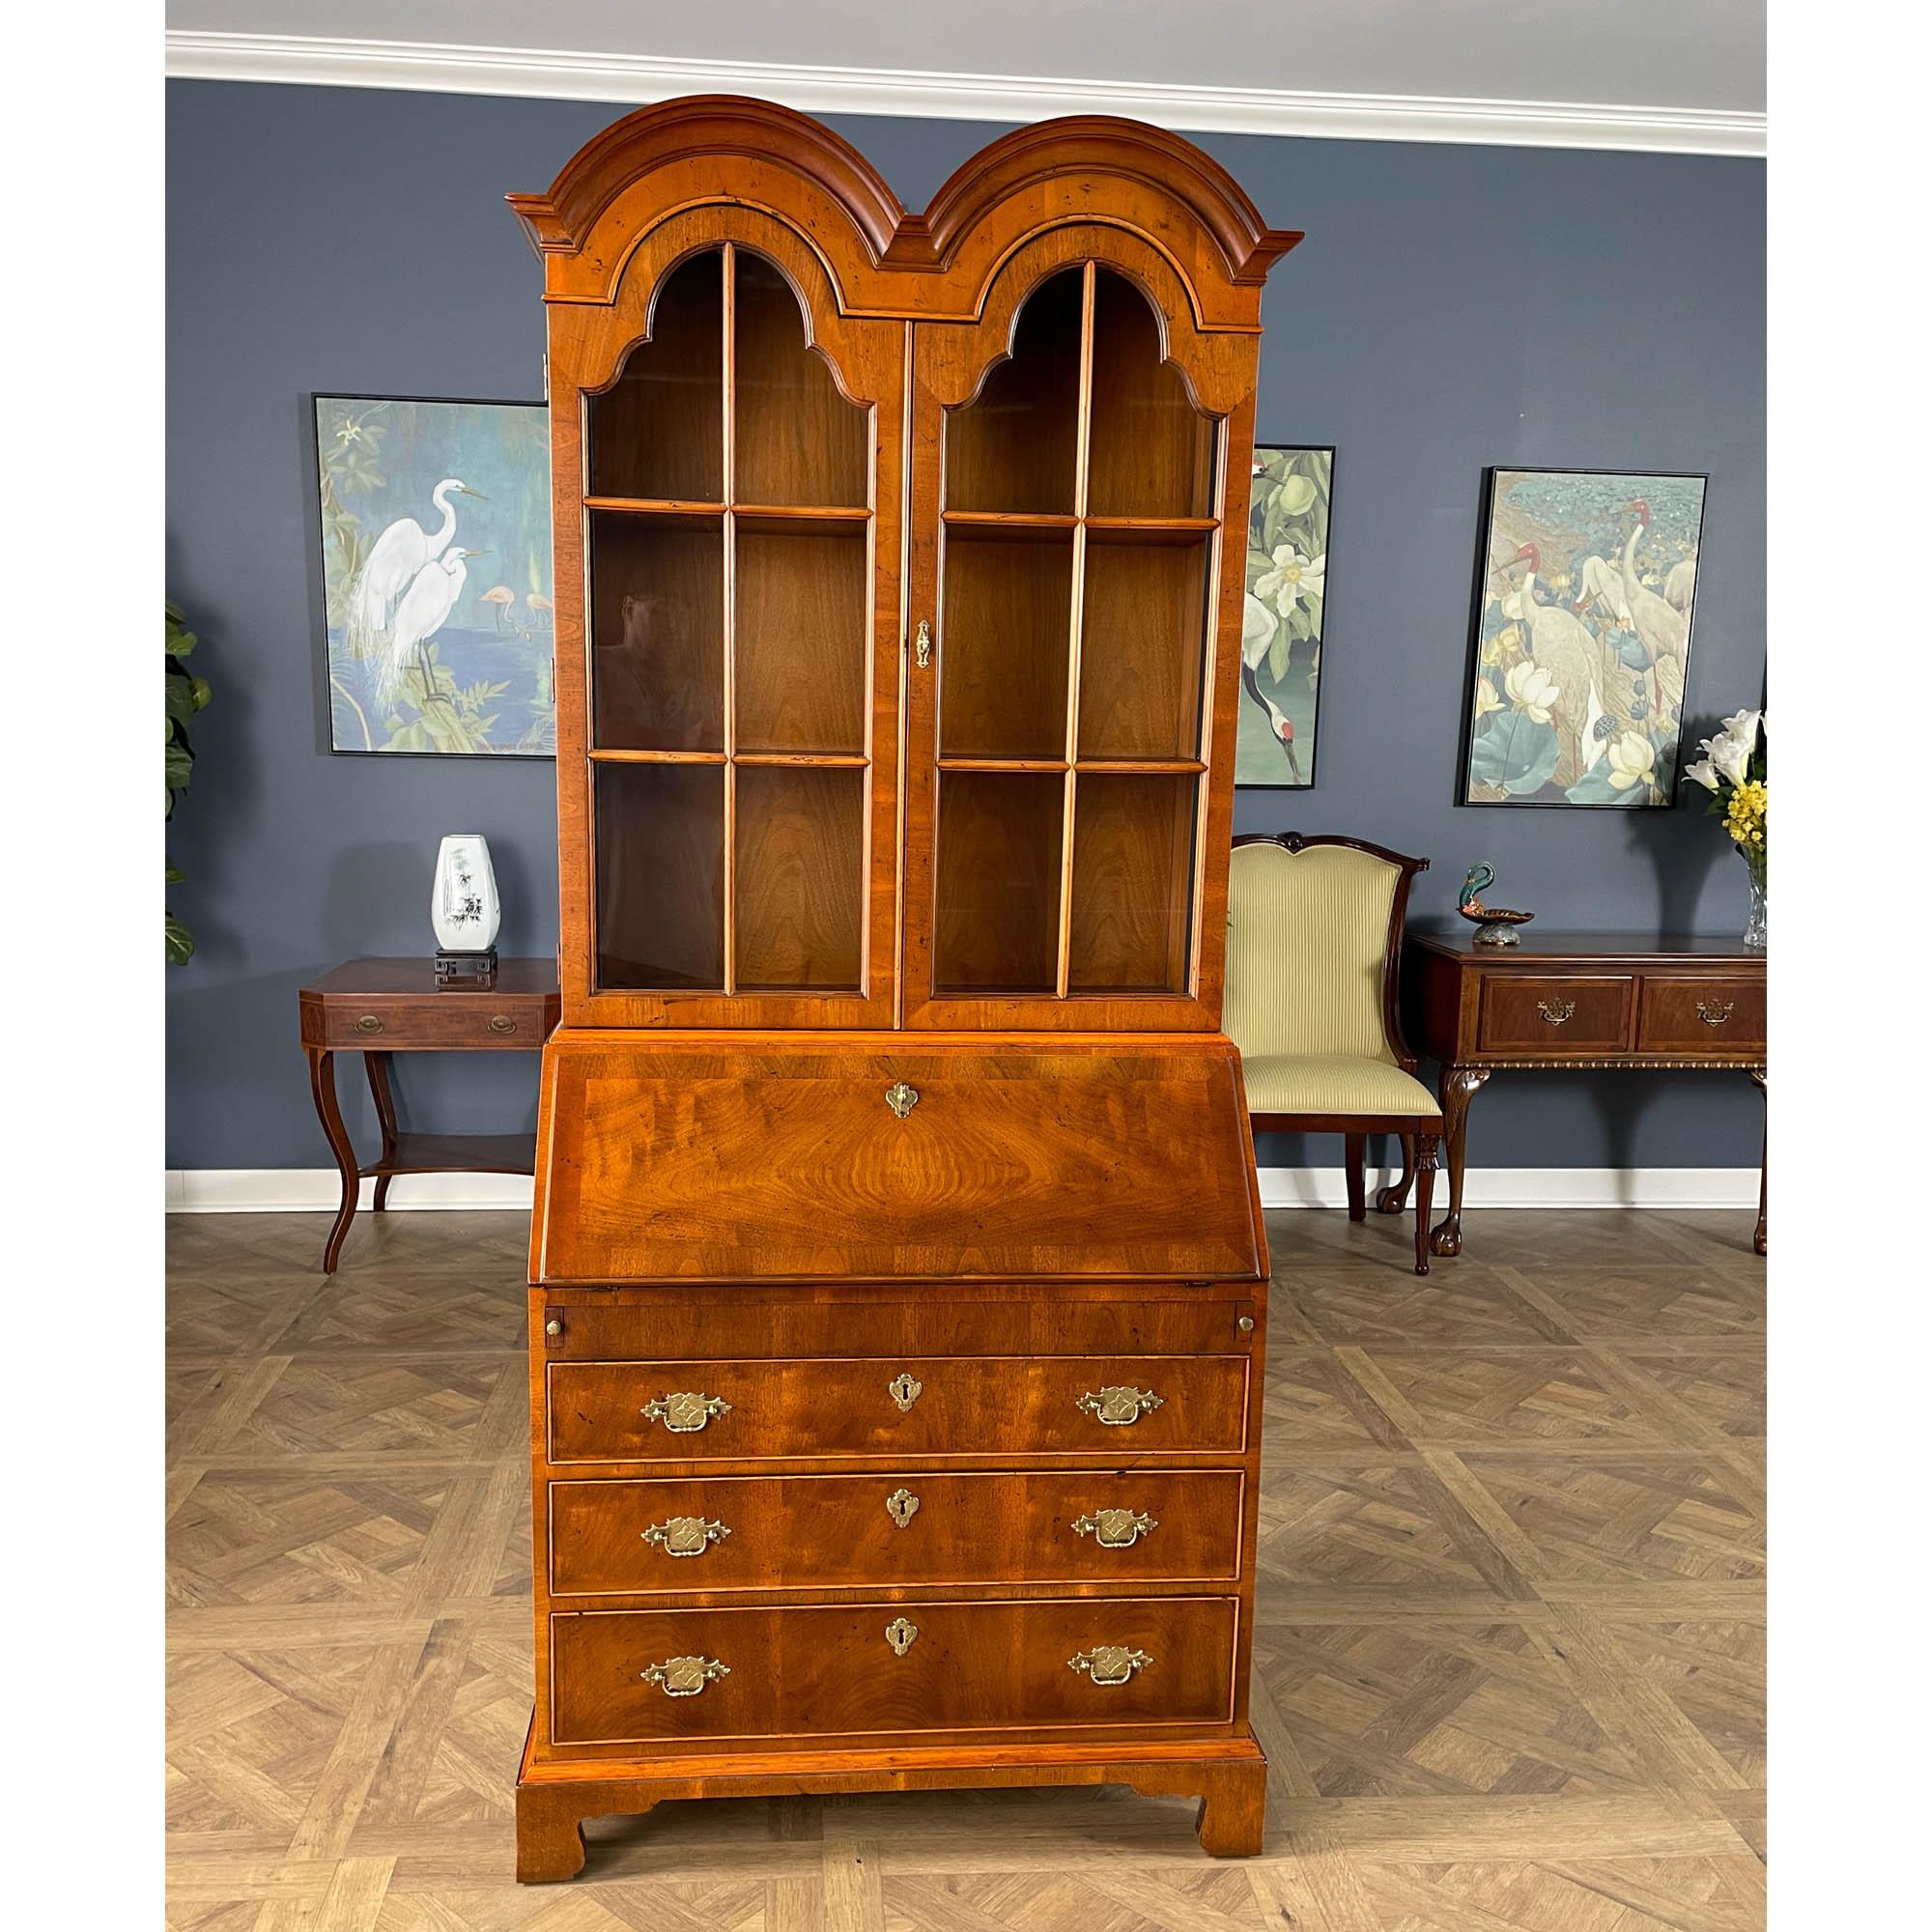 A Vintage Henredon Secretary Desk brought to you by Niagara Furniture. This desk is impressive in both it’s design and scale. Made of beautifully grained walnut, the secretary bookcase features double domed arches on the top as well as adjustable